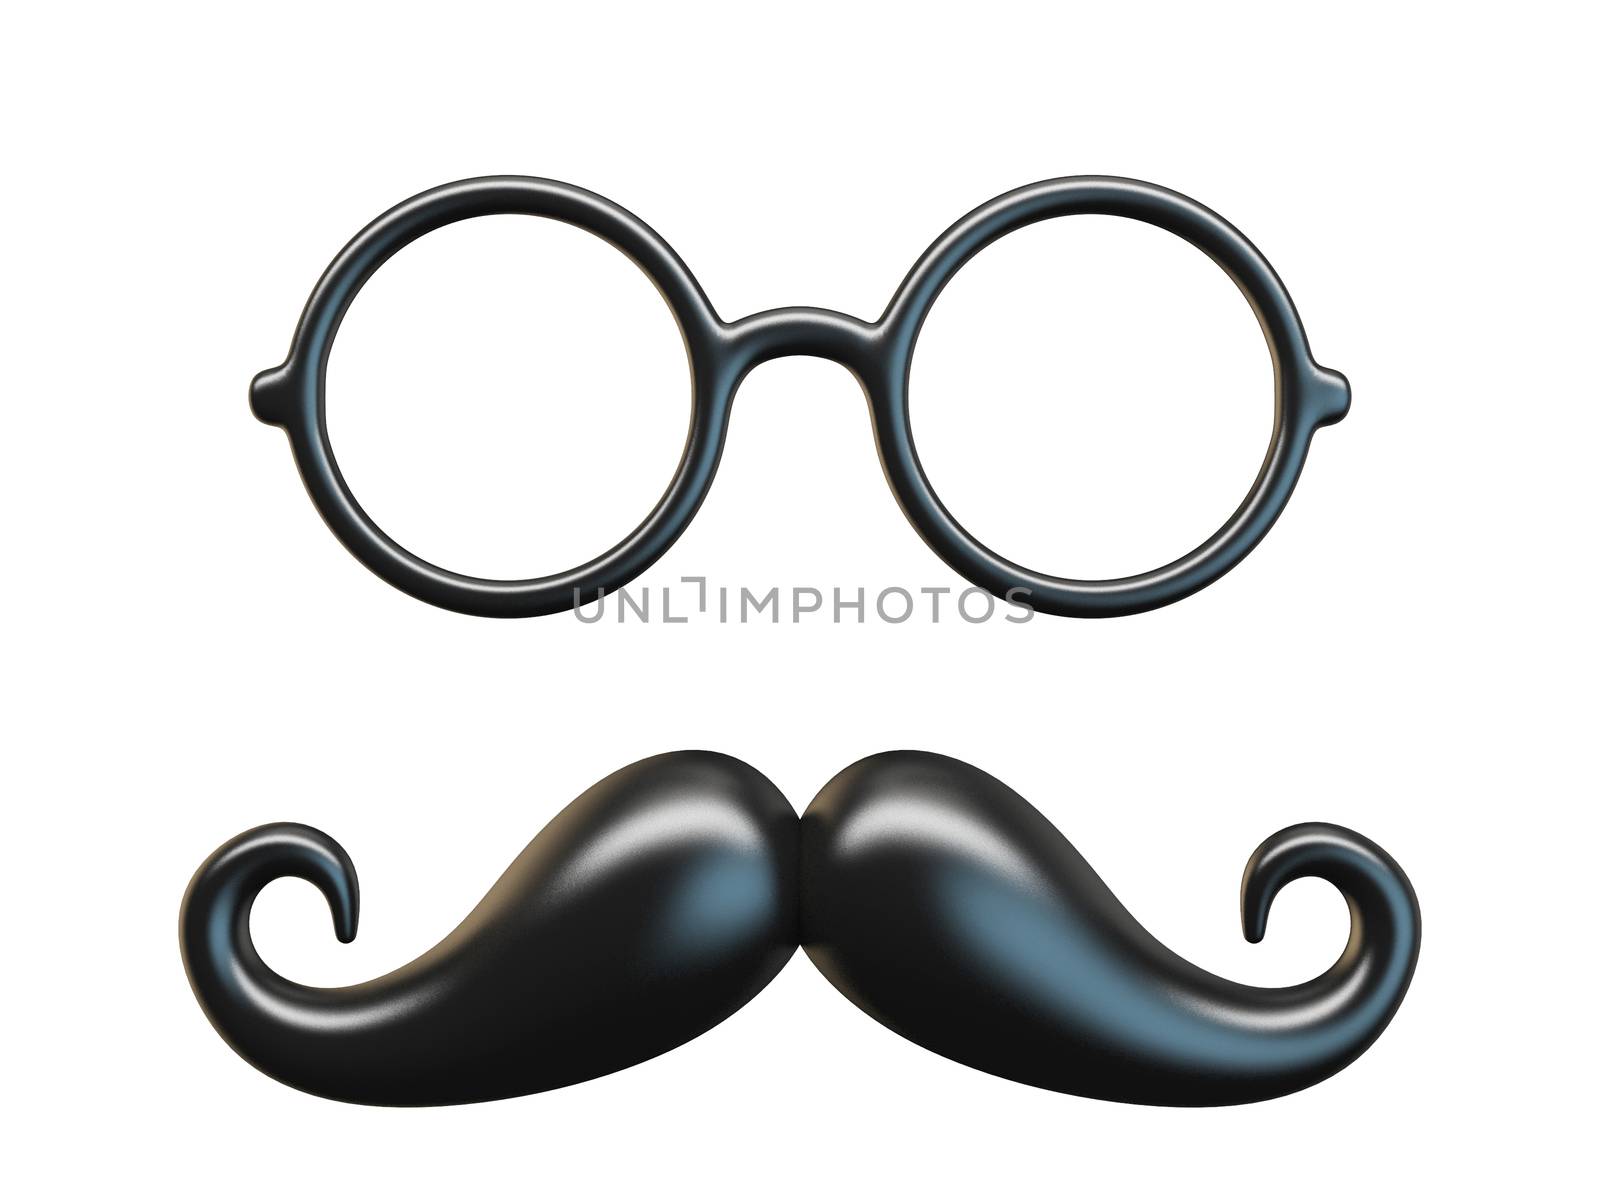 Black mustache and circular glasses 3D rendering illustration isolated on white background